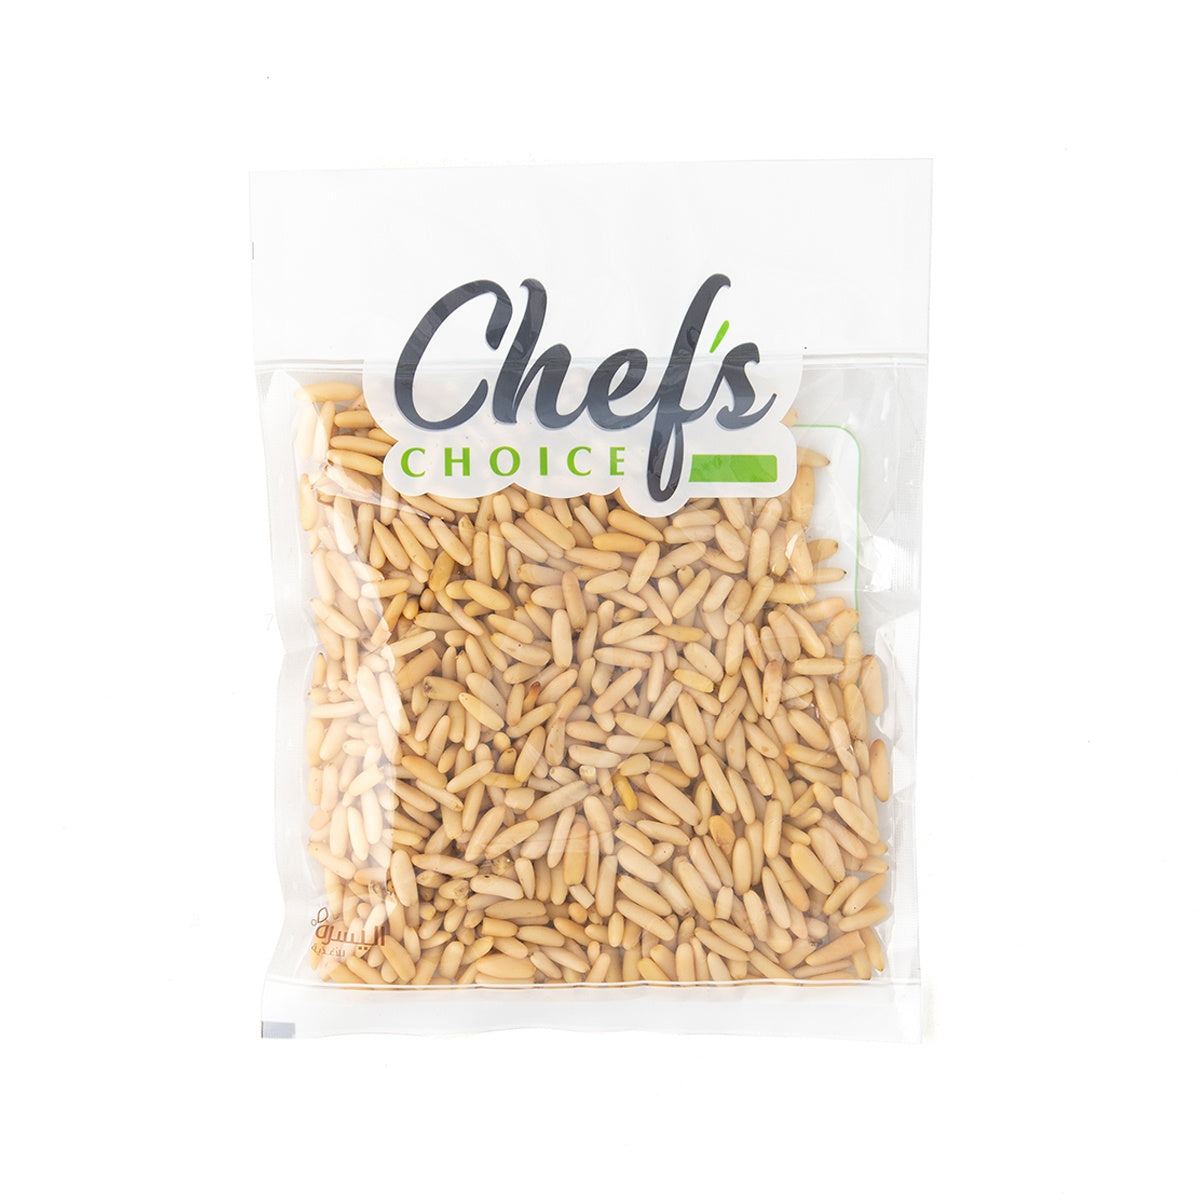 Pine Nuts 250g